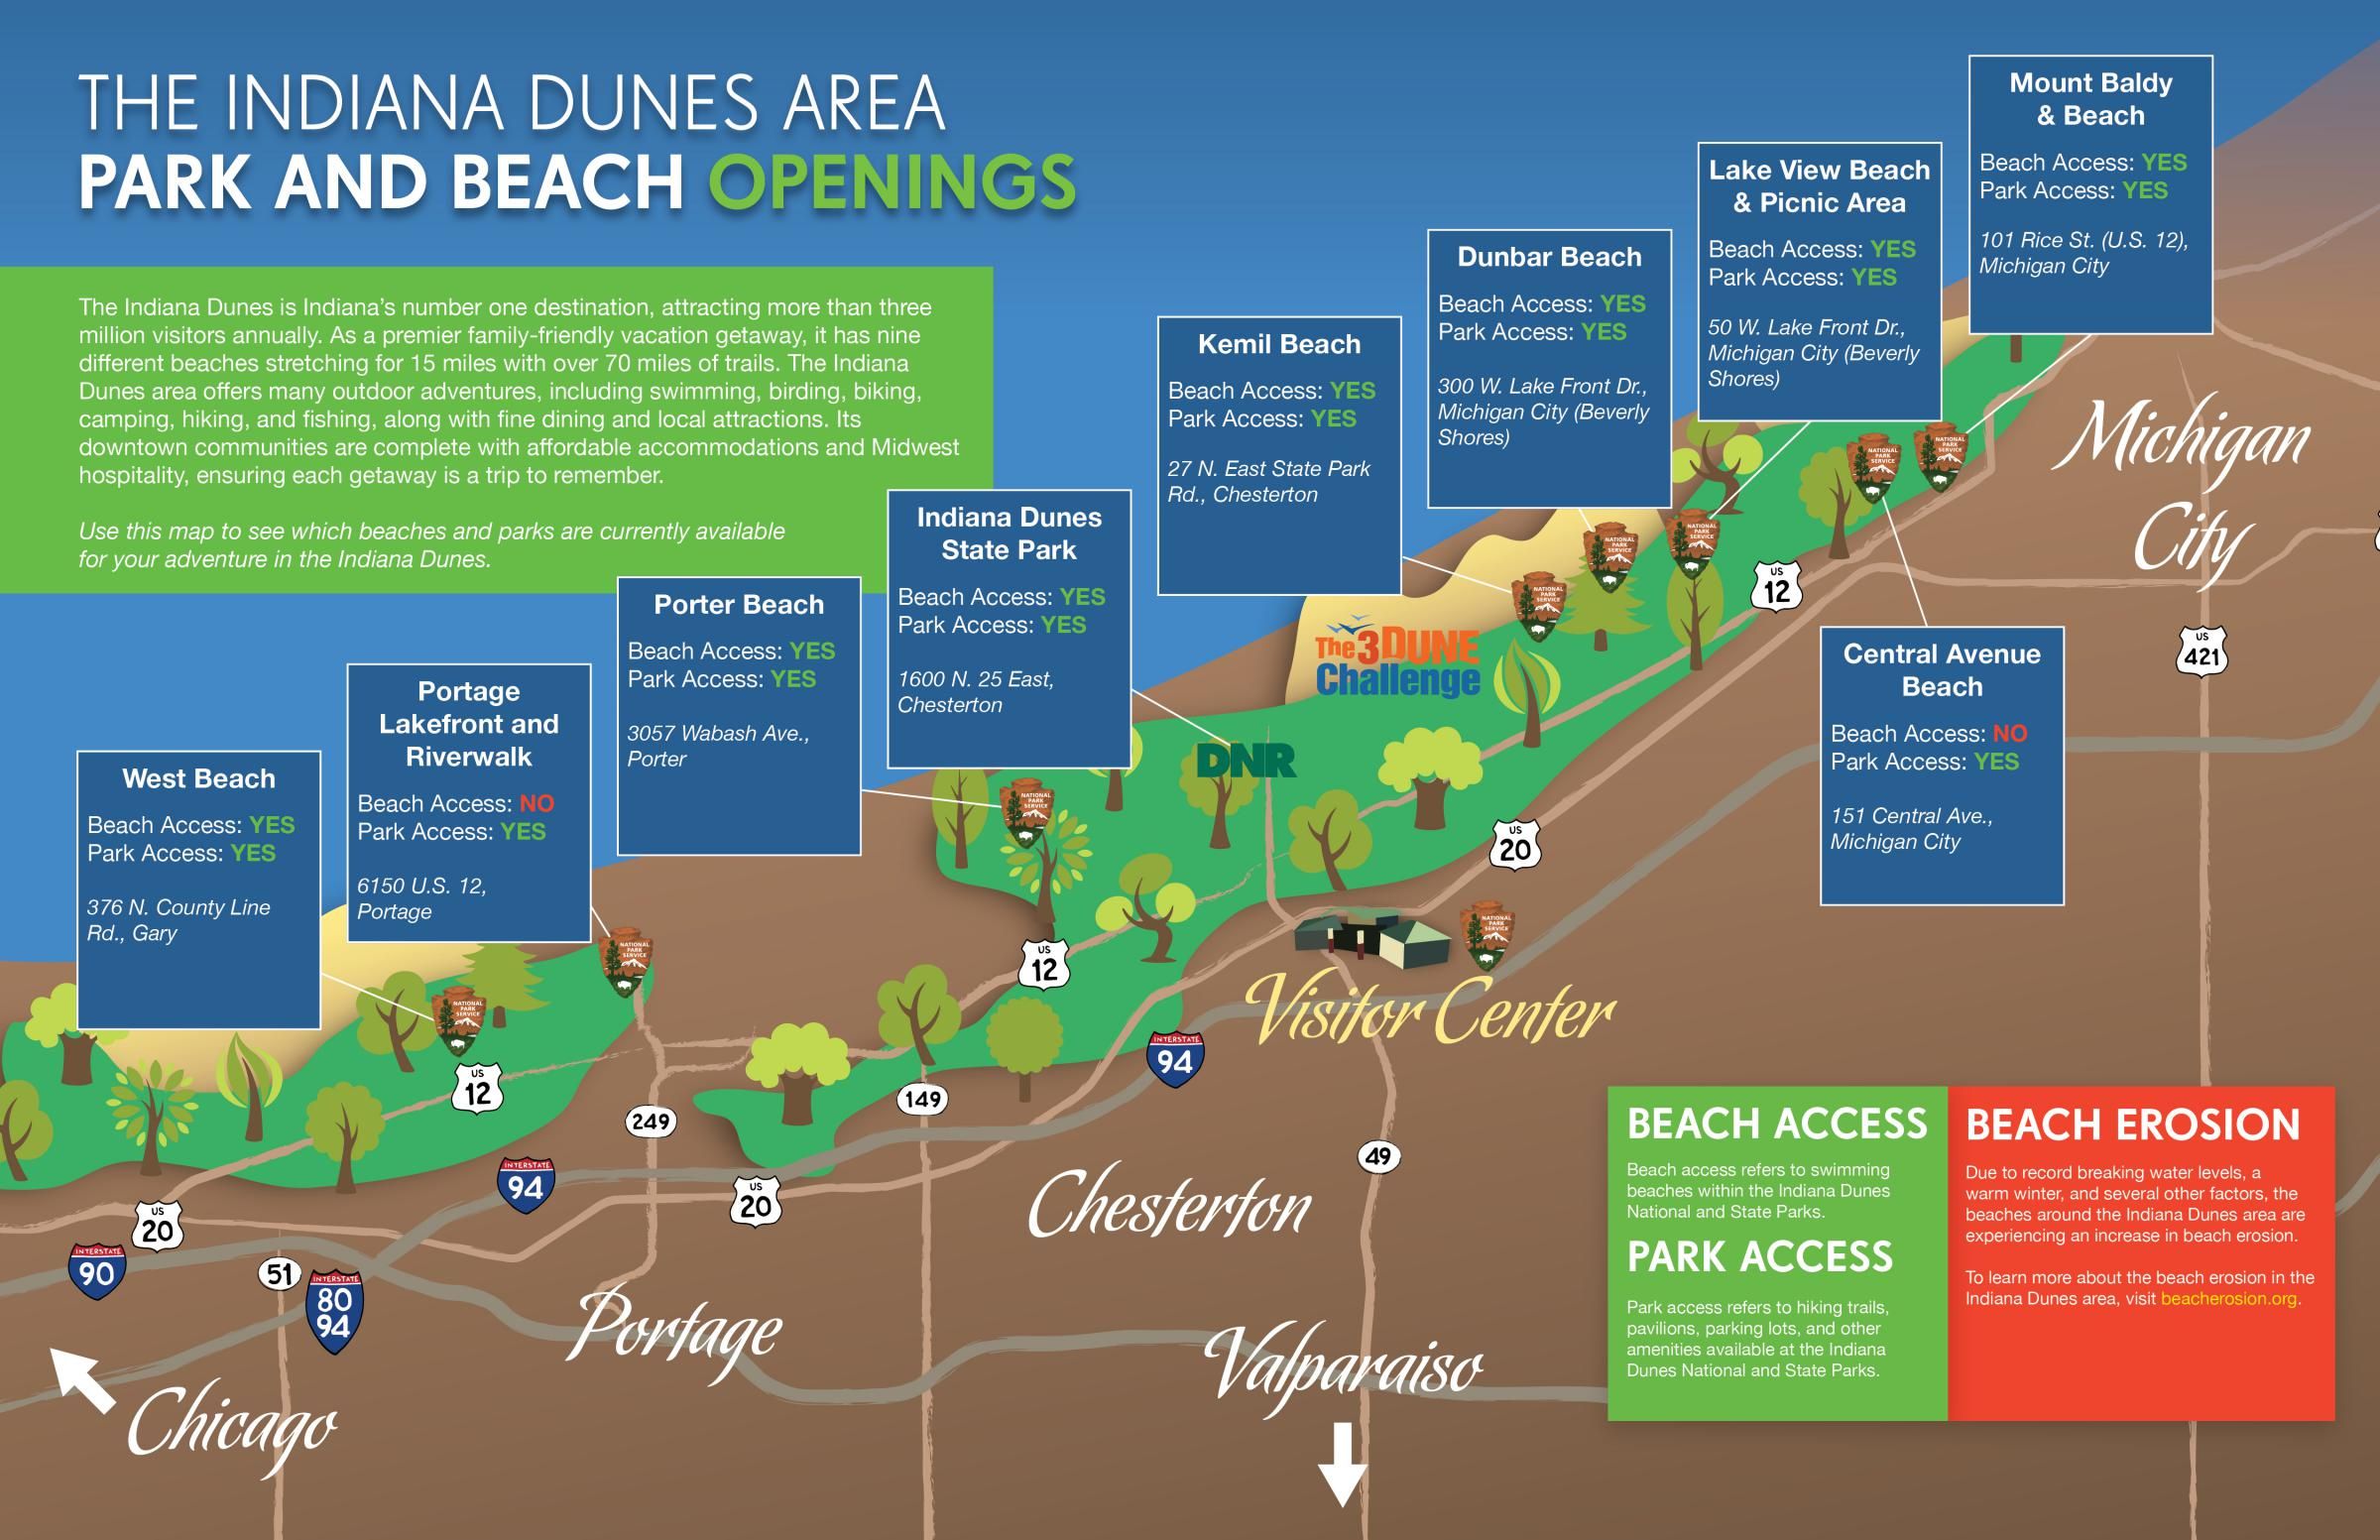 A map shows which beaches are closed in Indiana Dunes National Park. Image courtesy of Indiana Dunes Tourism.